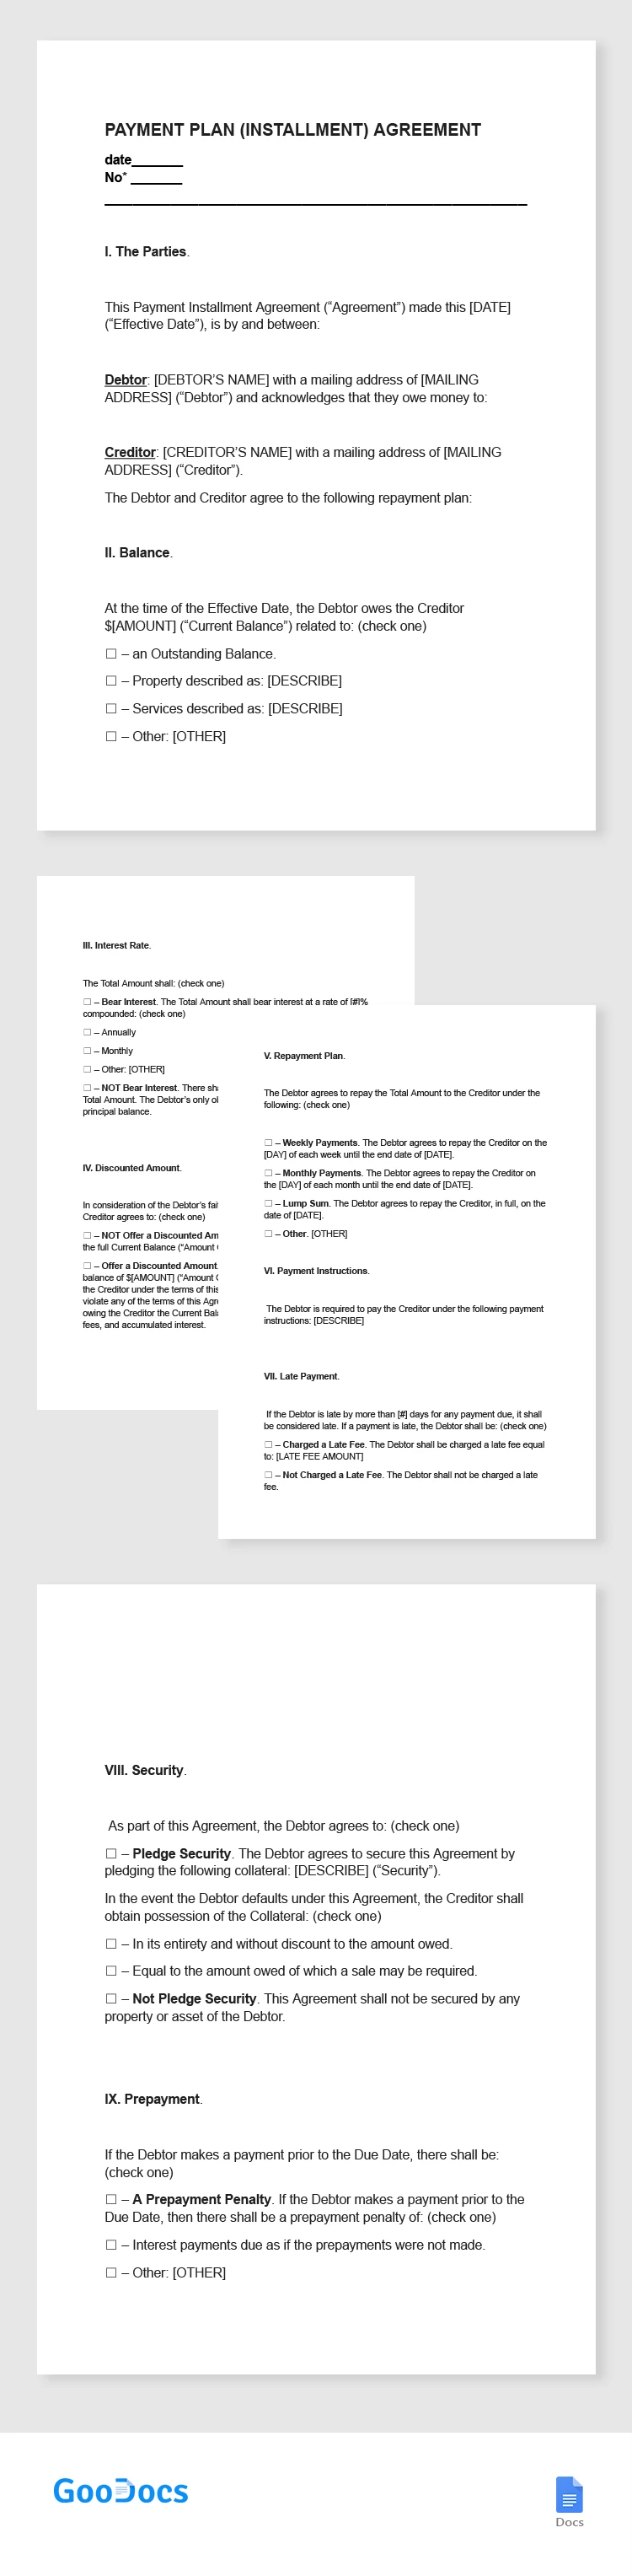 Payment Agreement - free Google Docs Template - 10065347